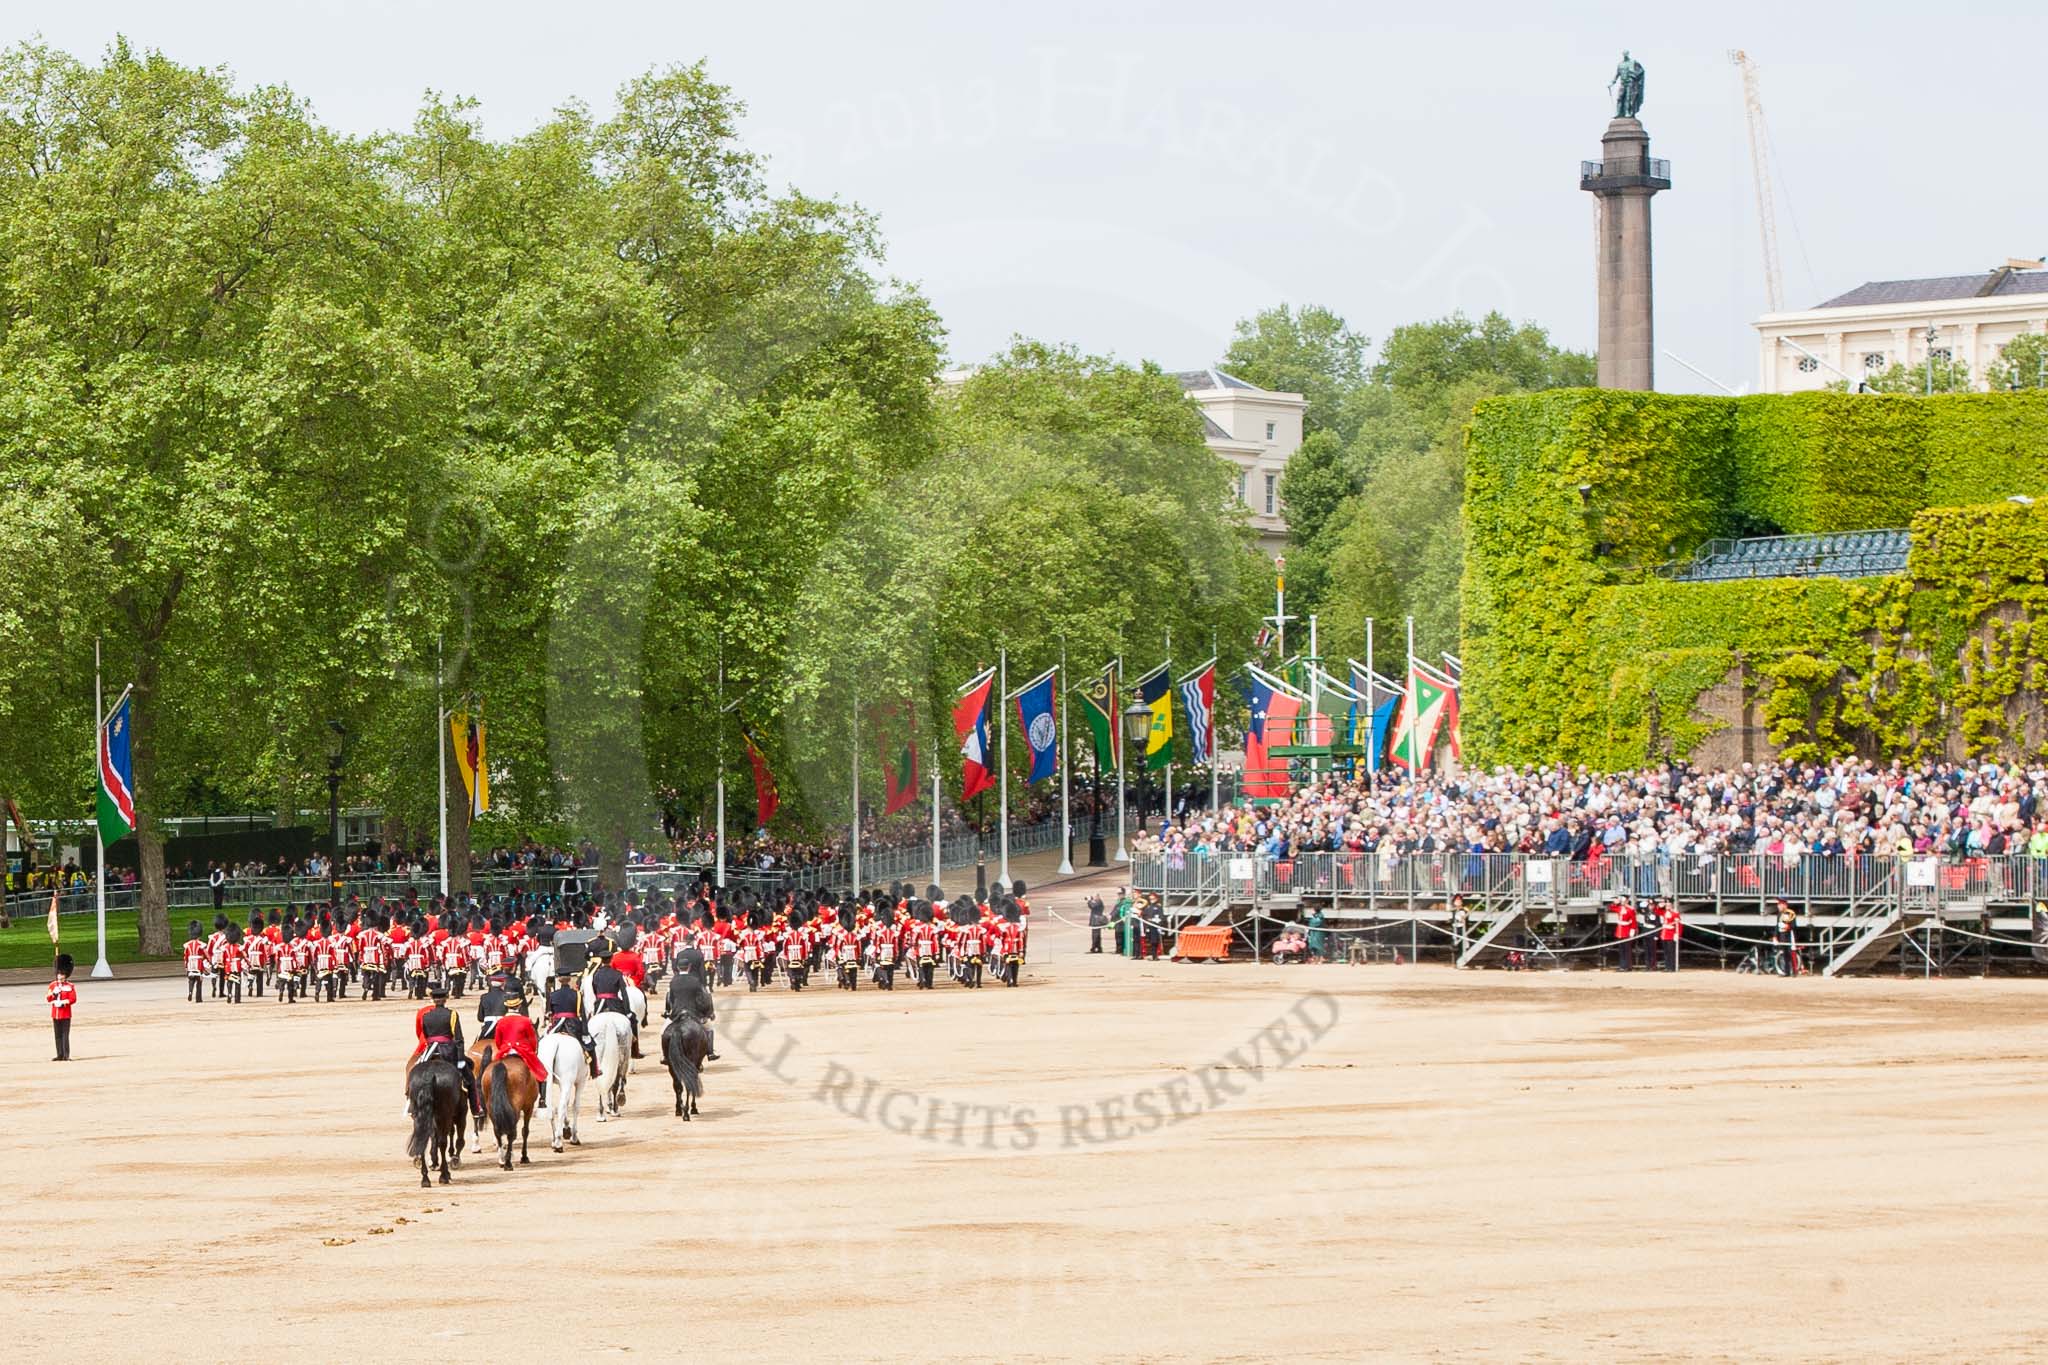 Major General's Review 2013: The March Off - the Massed Bands are leaving towards The Mall, followed by the coach that will carry HM The Queen and HRH The Duke of Kent..
Horse Guards Parade, Westminster,
London SW1,

United Kingdom,
on 01 June 2013 at 12:08, image #719